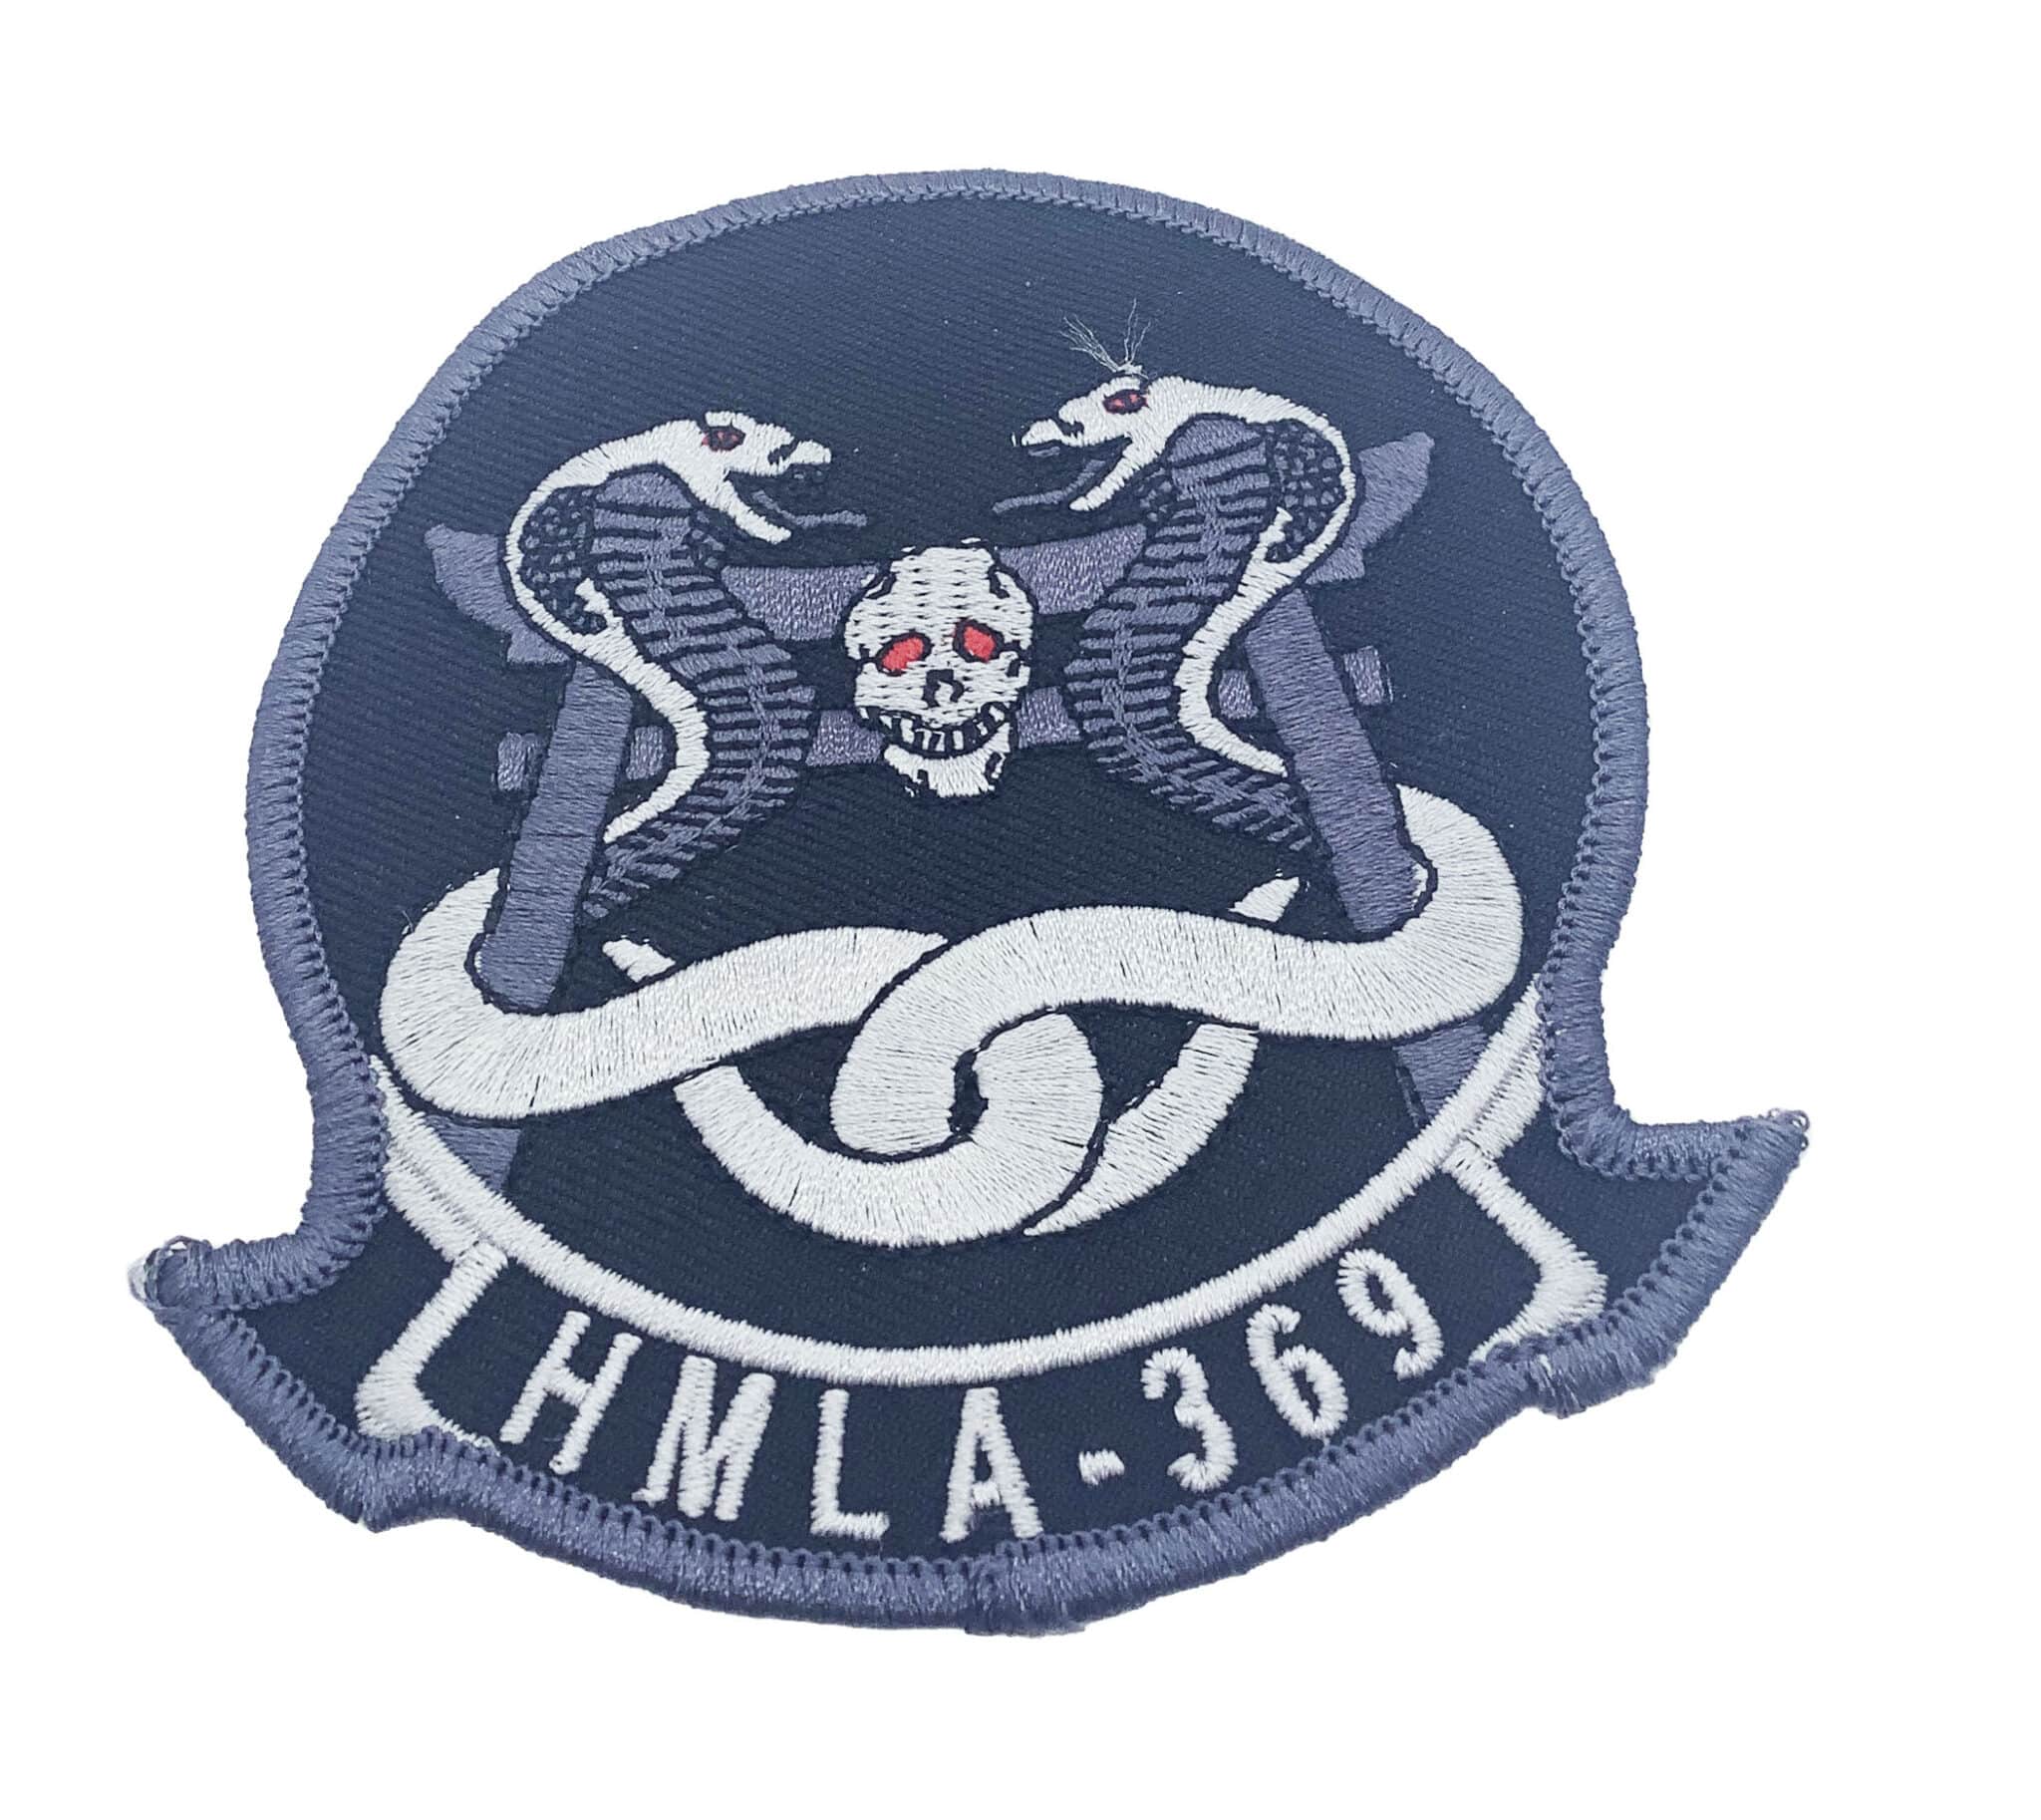 HMLA-369 Gunfighters Black Squadron Patch – No Hook and Loop